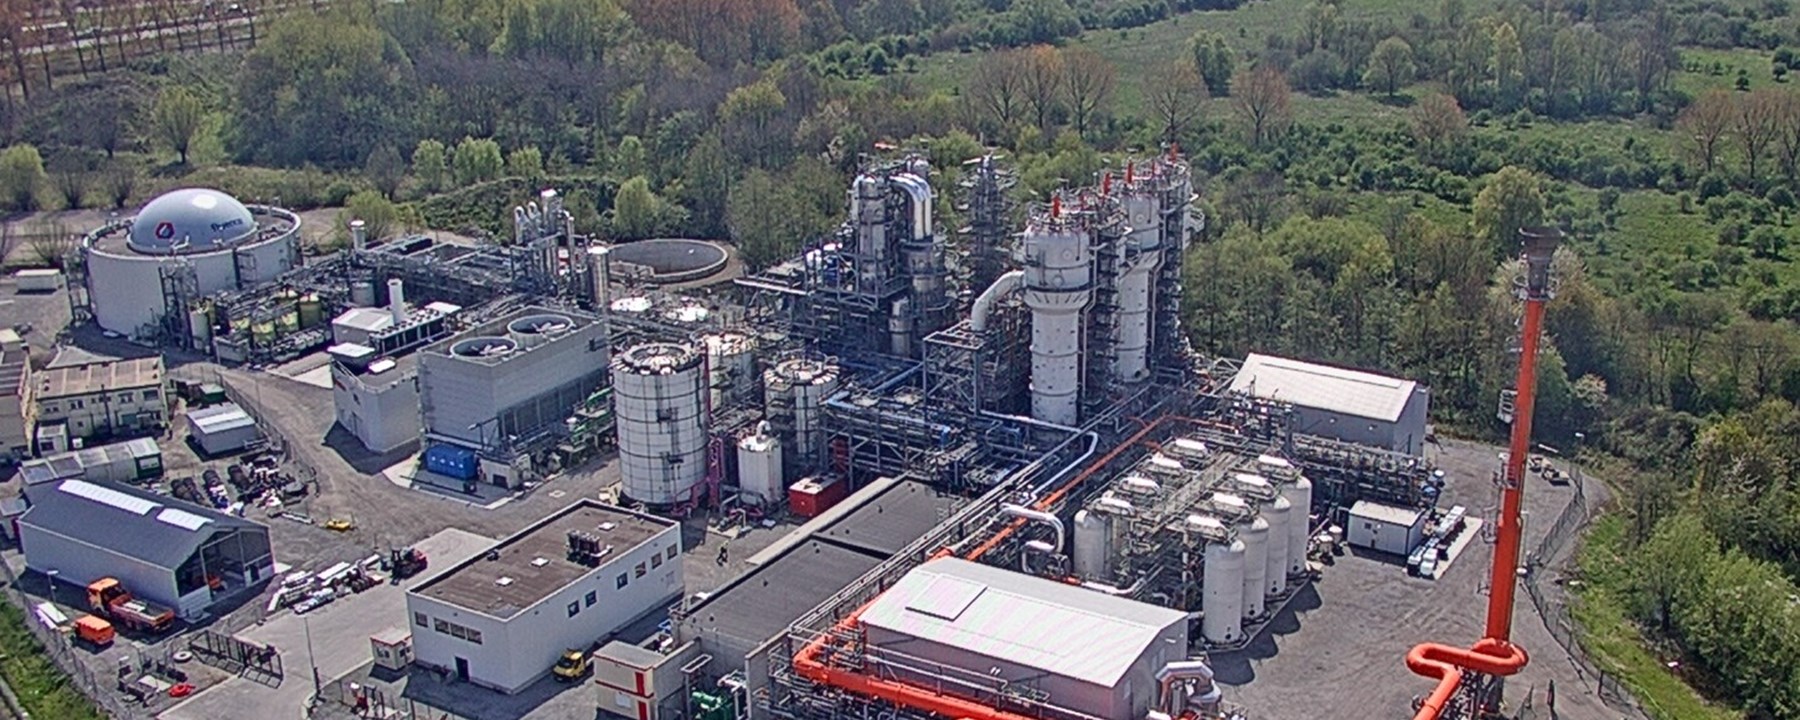 ArcelorMittal and LanzaTech announce first ethanol samples from commercial flagship carbon capture and utilisation facility in Ghent, Belgium